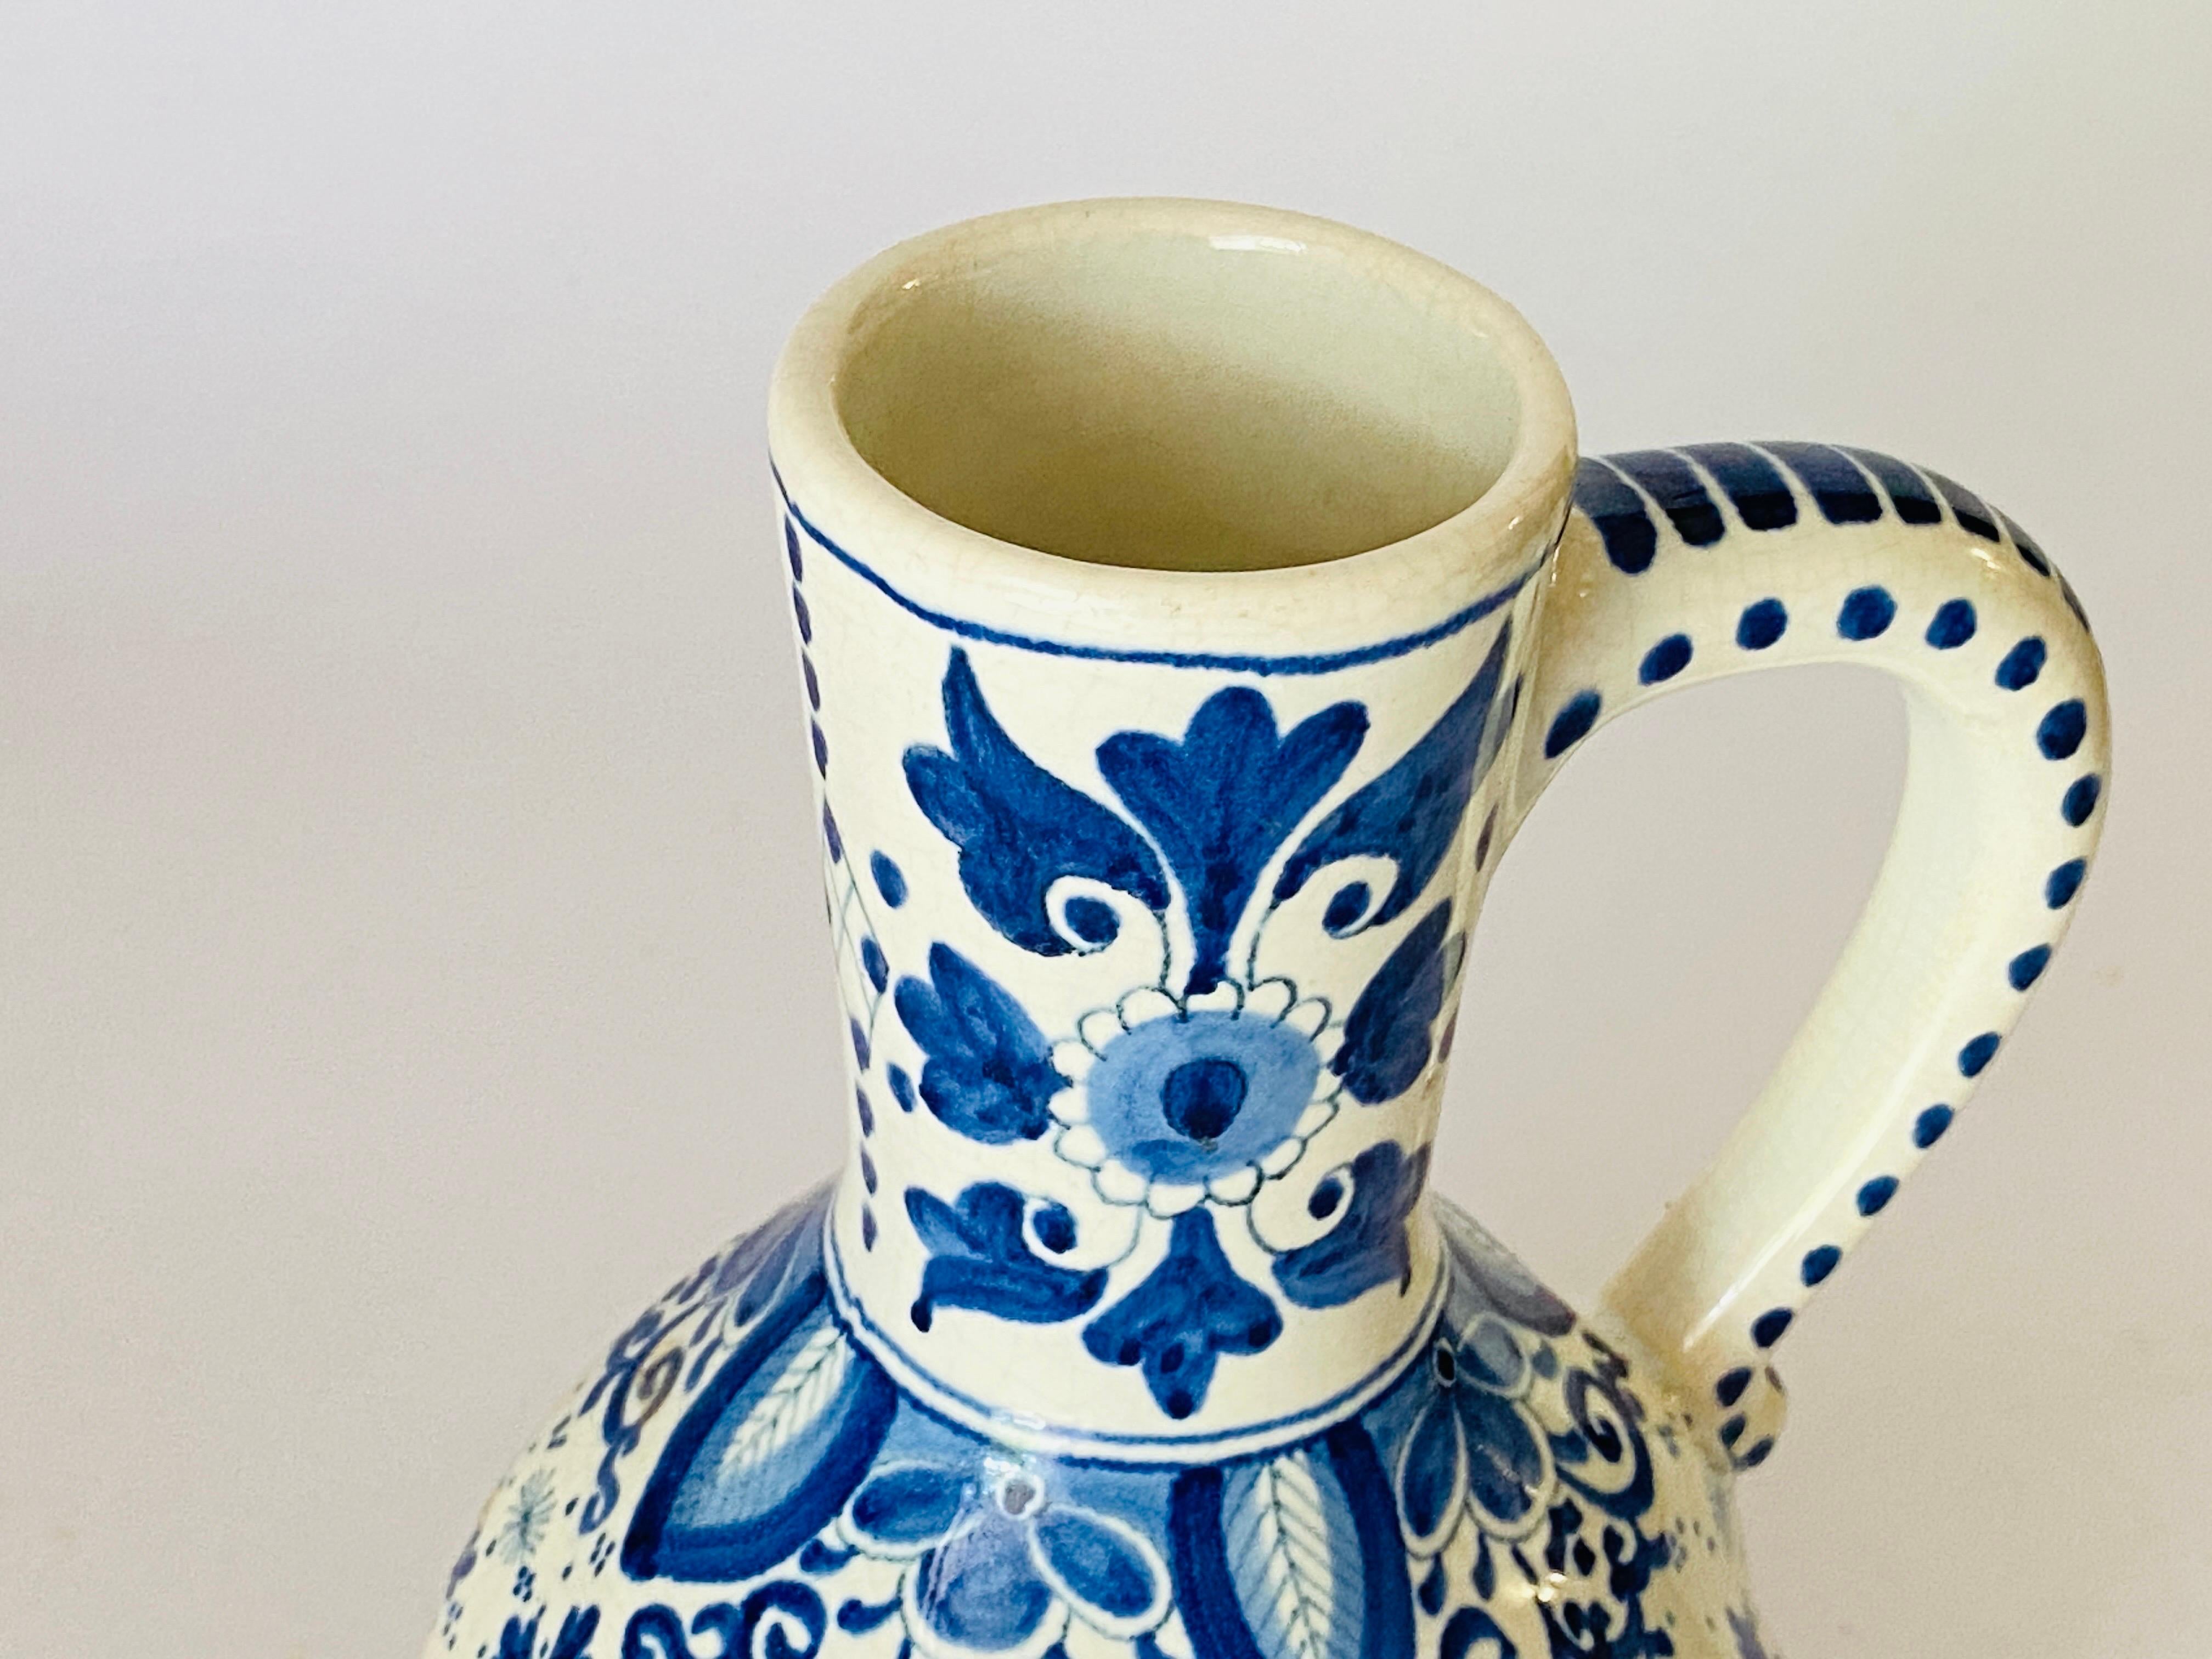 Hand-Painted Delft Jug in Faïence, White and Blue, 19th Century Netherlands For Sale